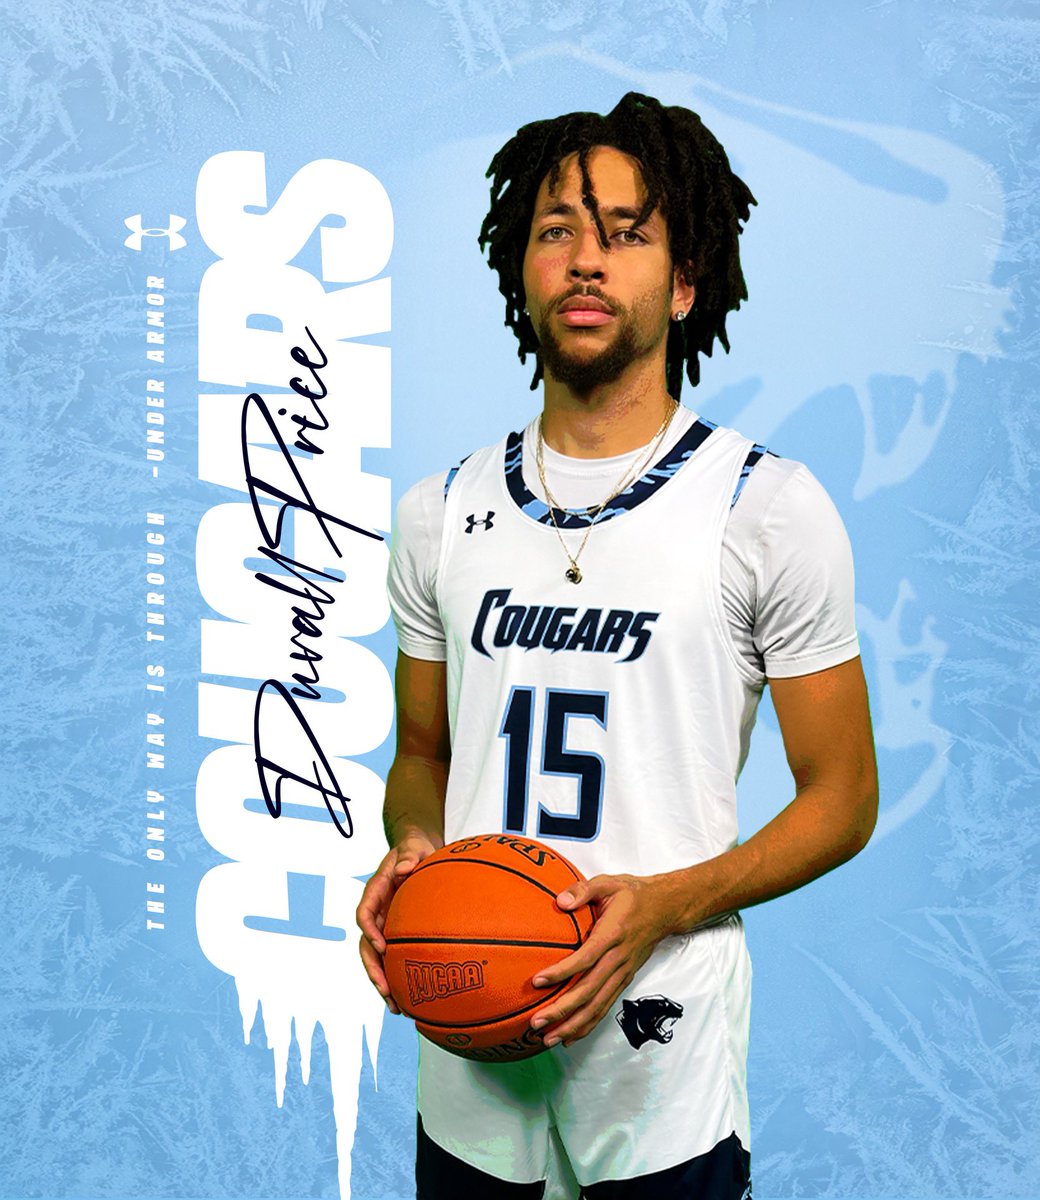 Cougar Nation, help us welcome 6’7 Soph. W/F Duvall Price!! Transfer from NCAA D2 Wingate Univ. / Looking to have a breakout season!! #GONNAPROVEIT #GOCOUGARS 🔵⚪️🔵